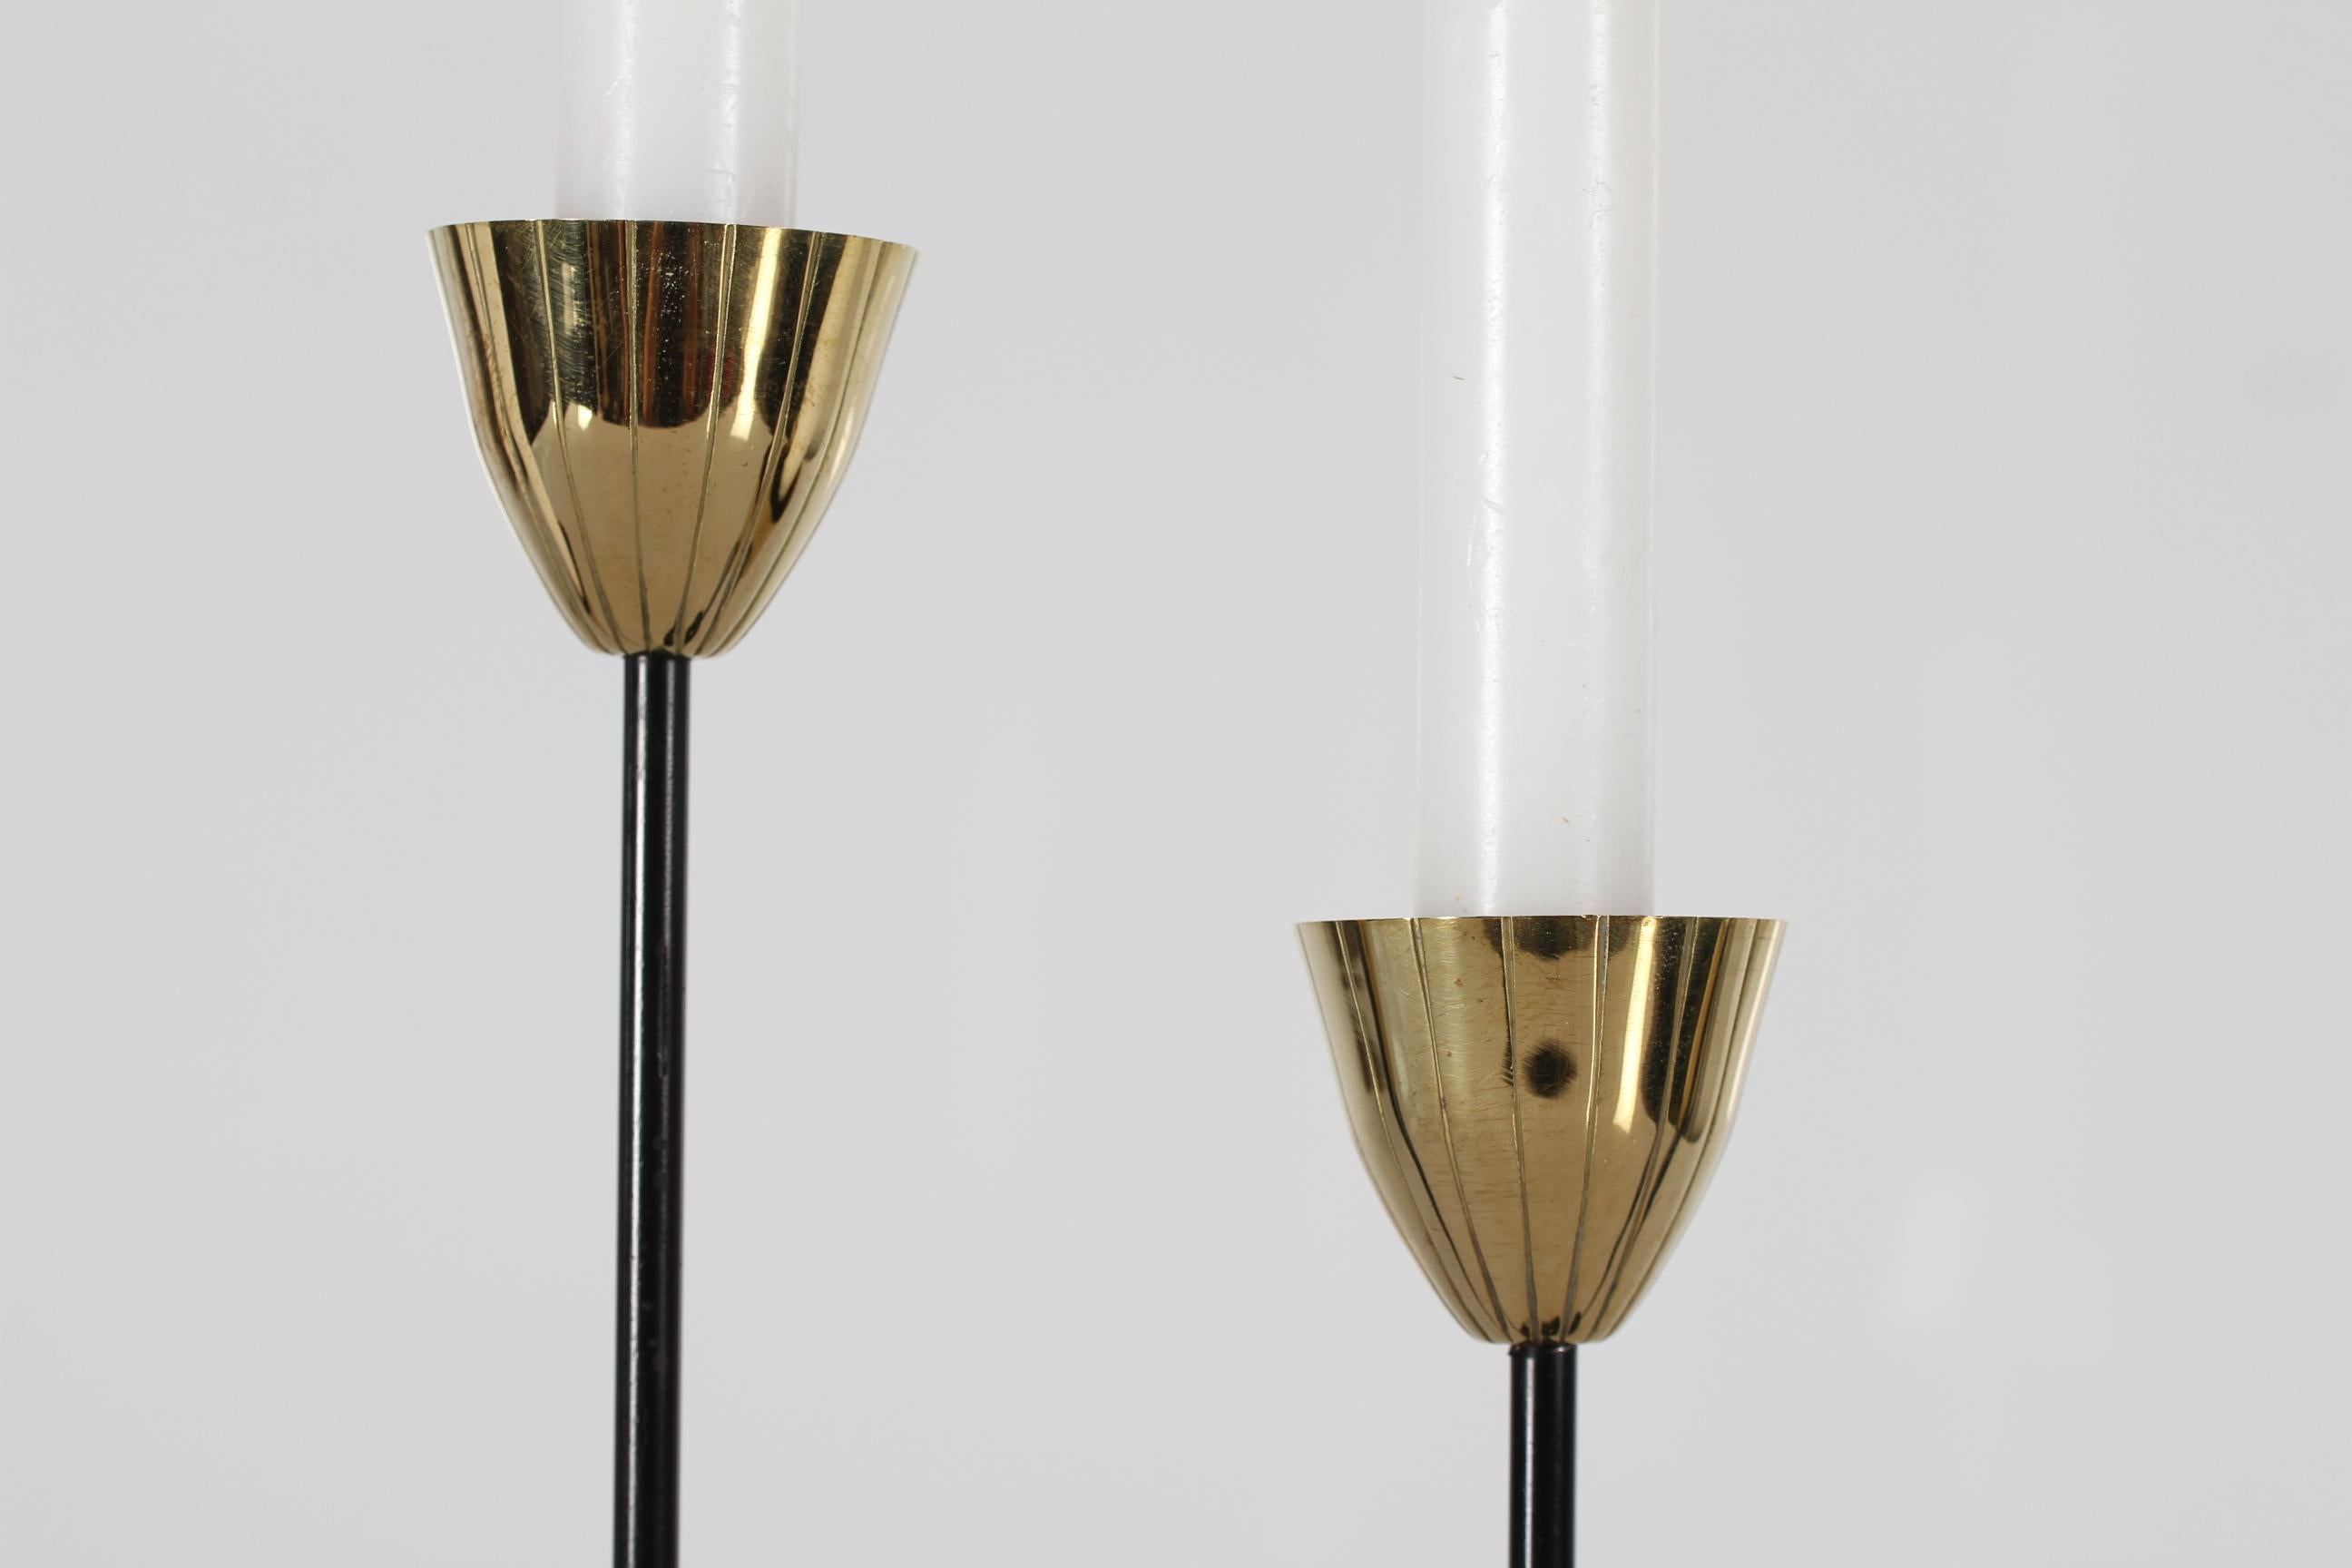 6 arm candelabra by Swedish designer Gunnar Ander (1908-1976) for Ystad Metall, Sweden.
The elegant candelabra is made of iron with black lacquer with flower shaped candleholders of brass.

Marked 